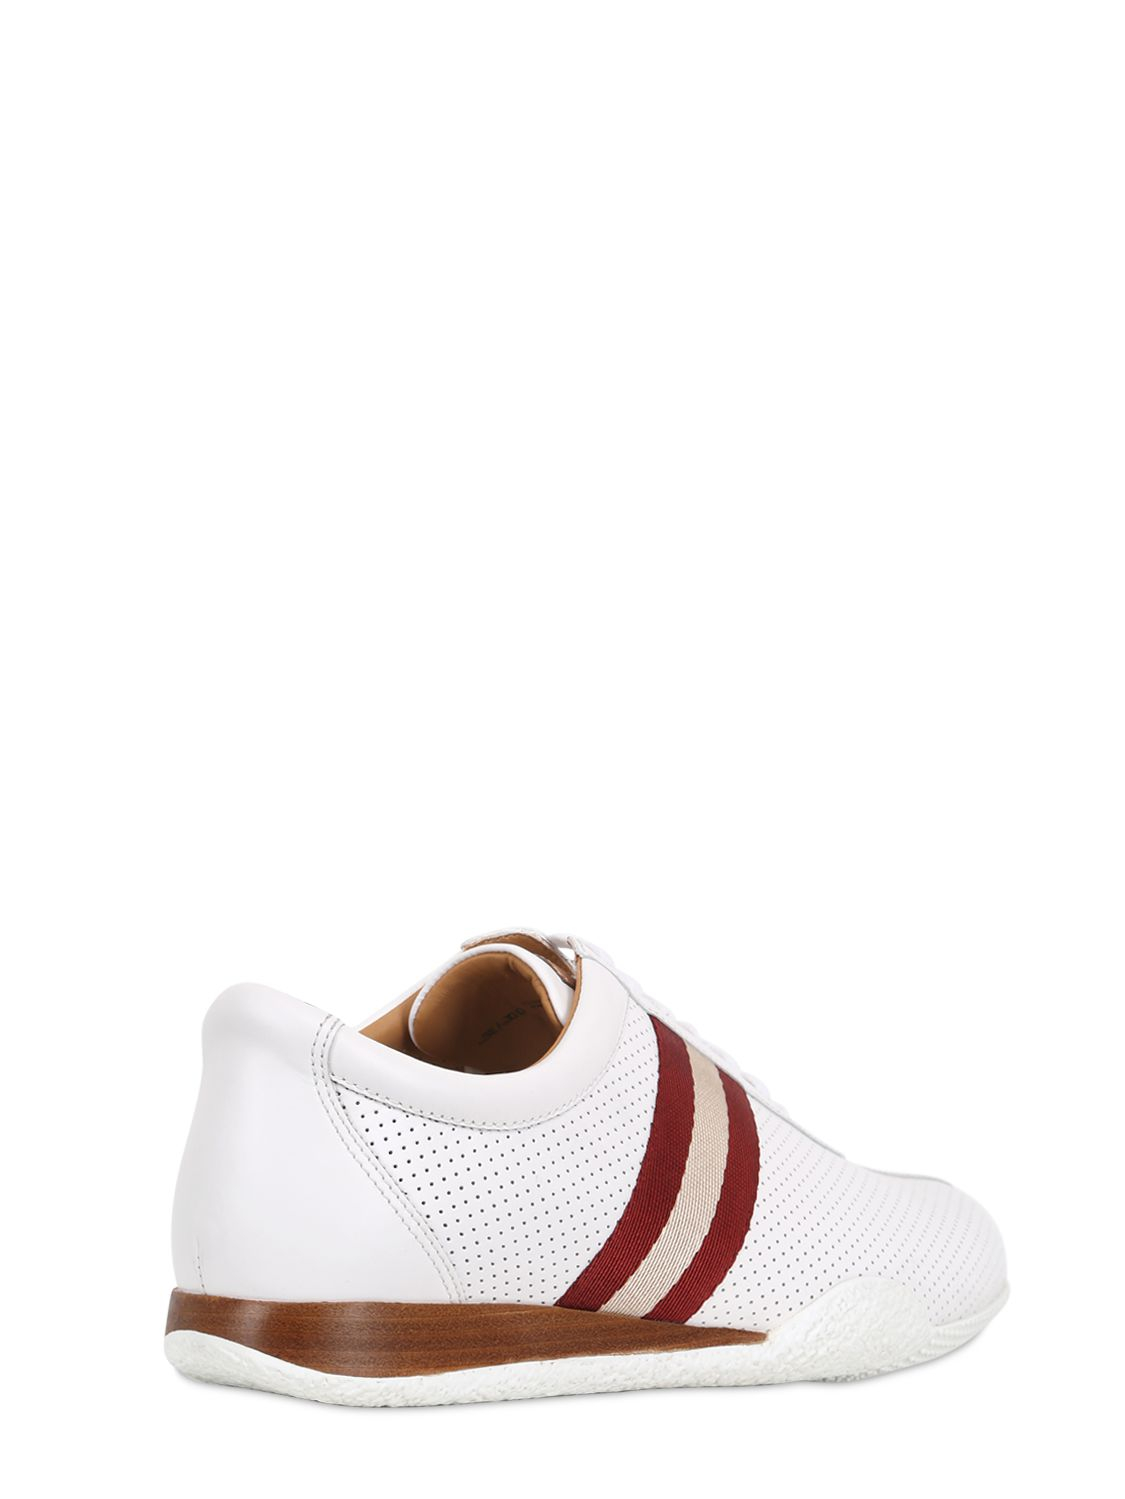 Bally Frenz Perforated Leather Sneakers in White Men | Lyst